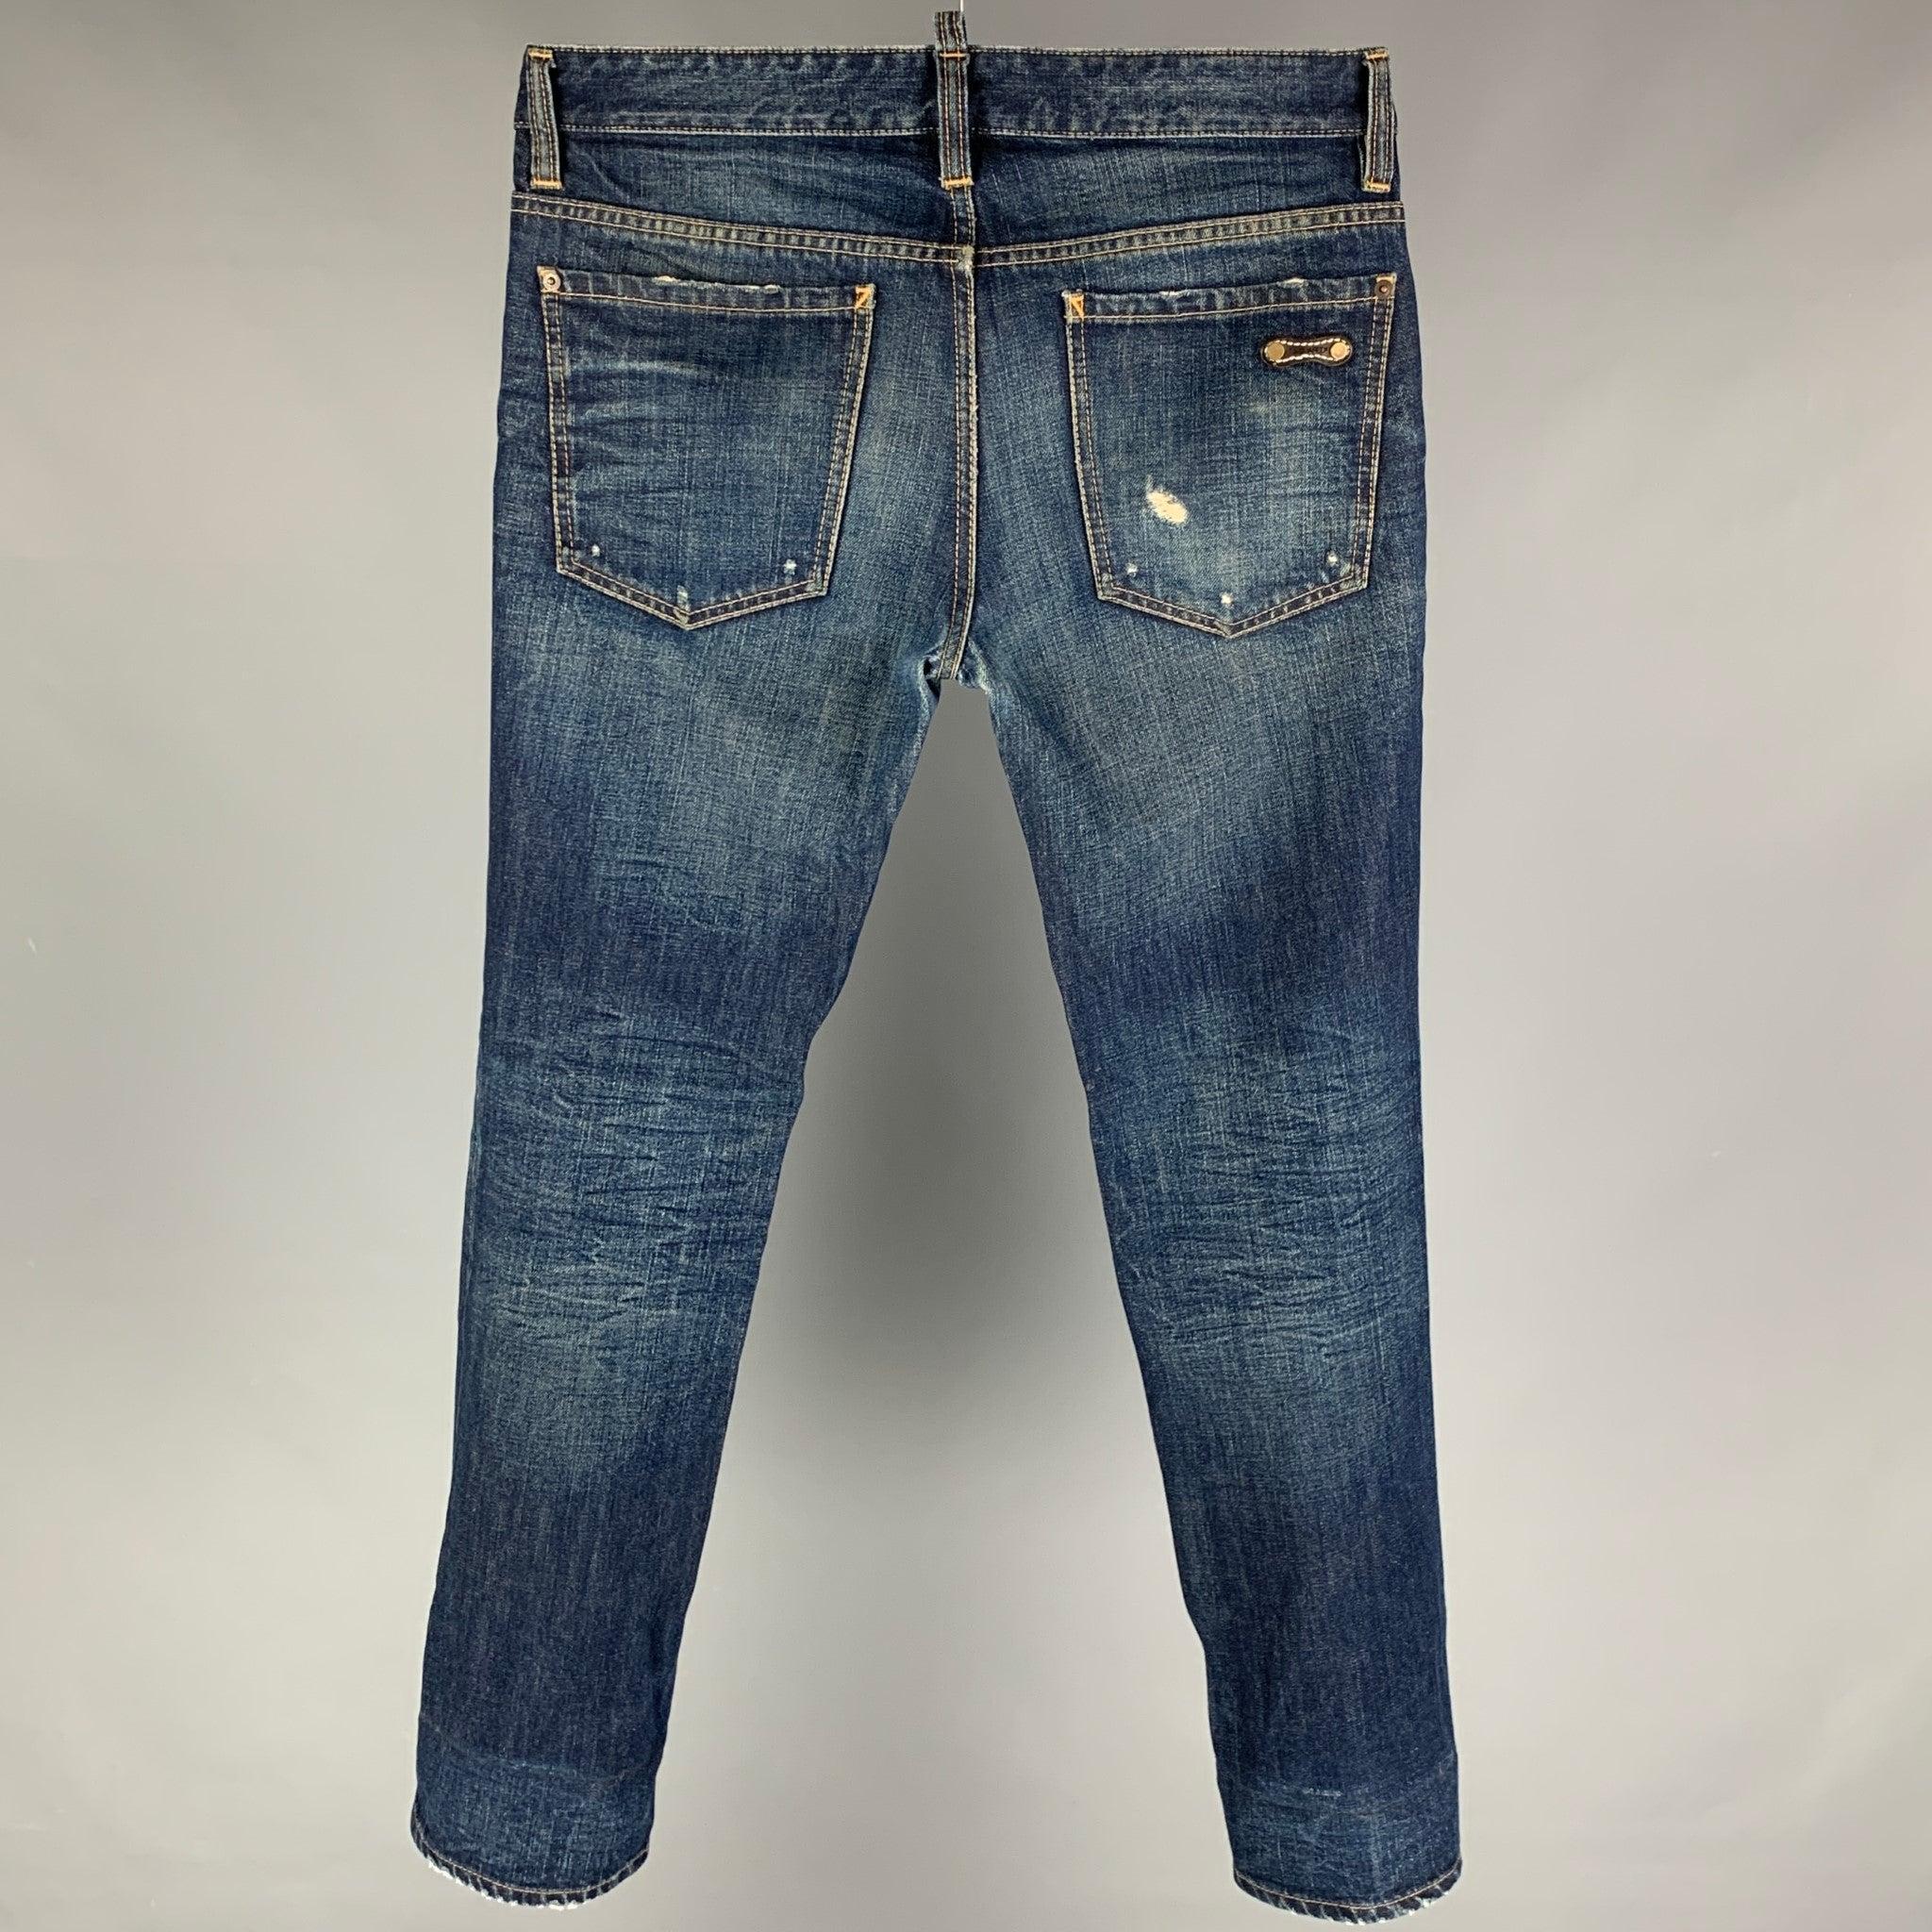 DSQUARED2 jeans comes in a blue distressed material featuring a skinny fit, contrast stitching, and a button fly closure. Made in Italy. Very Good
Pre-Owned Condition. 

Marked:   46 

Measurements: 
  Waist: 33 inches  Rise: 10 inches  Inseam: 32